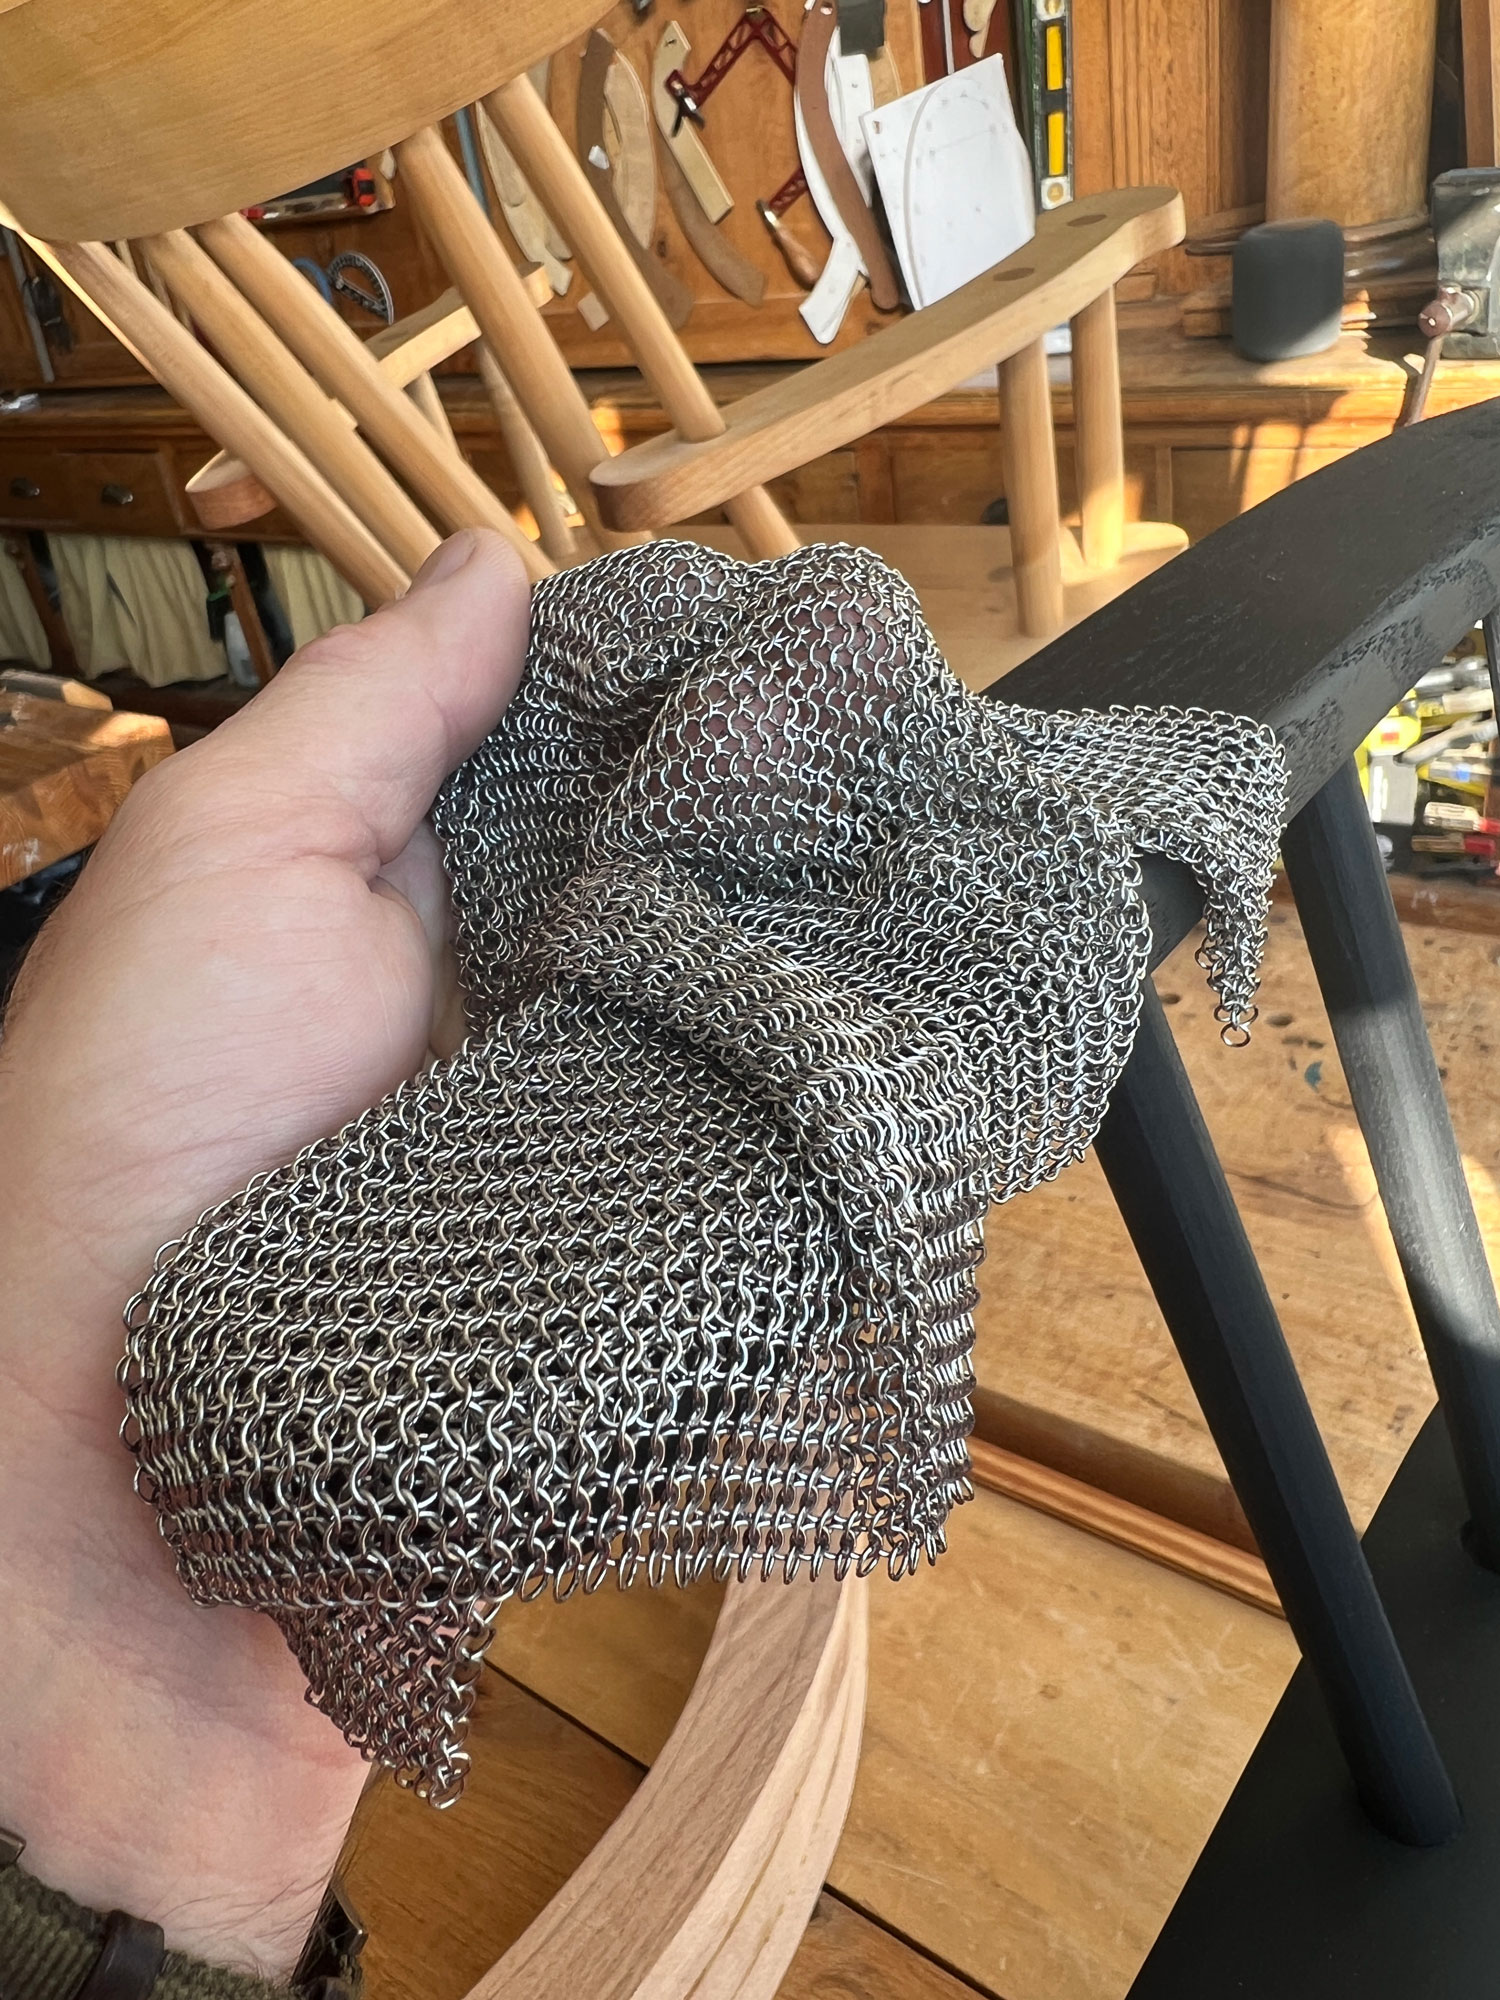 2022 Anarchist's Gift Guide, Day 13: Chainmail Pot Scrubber – Lost